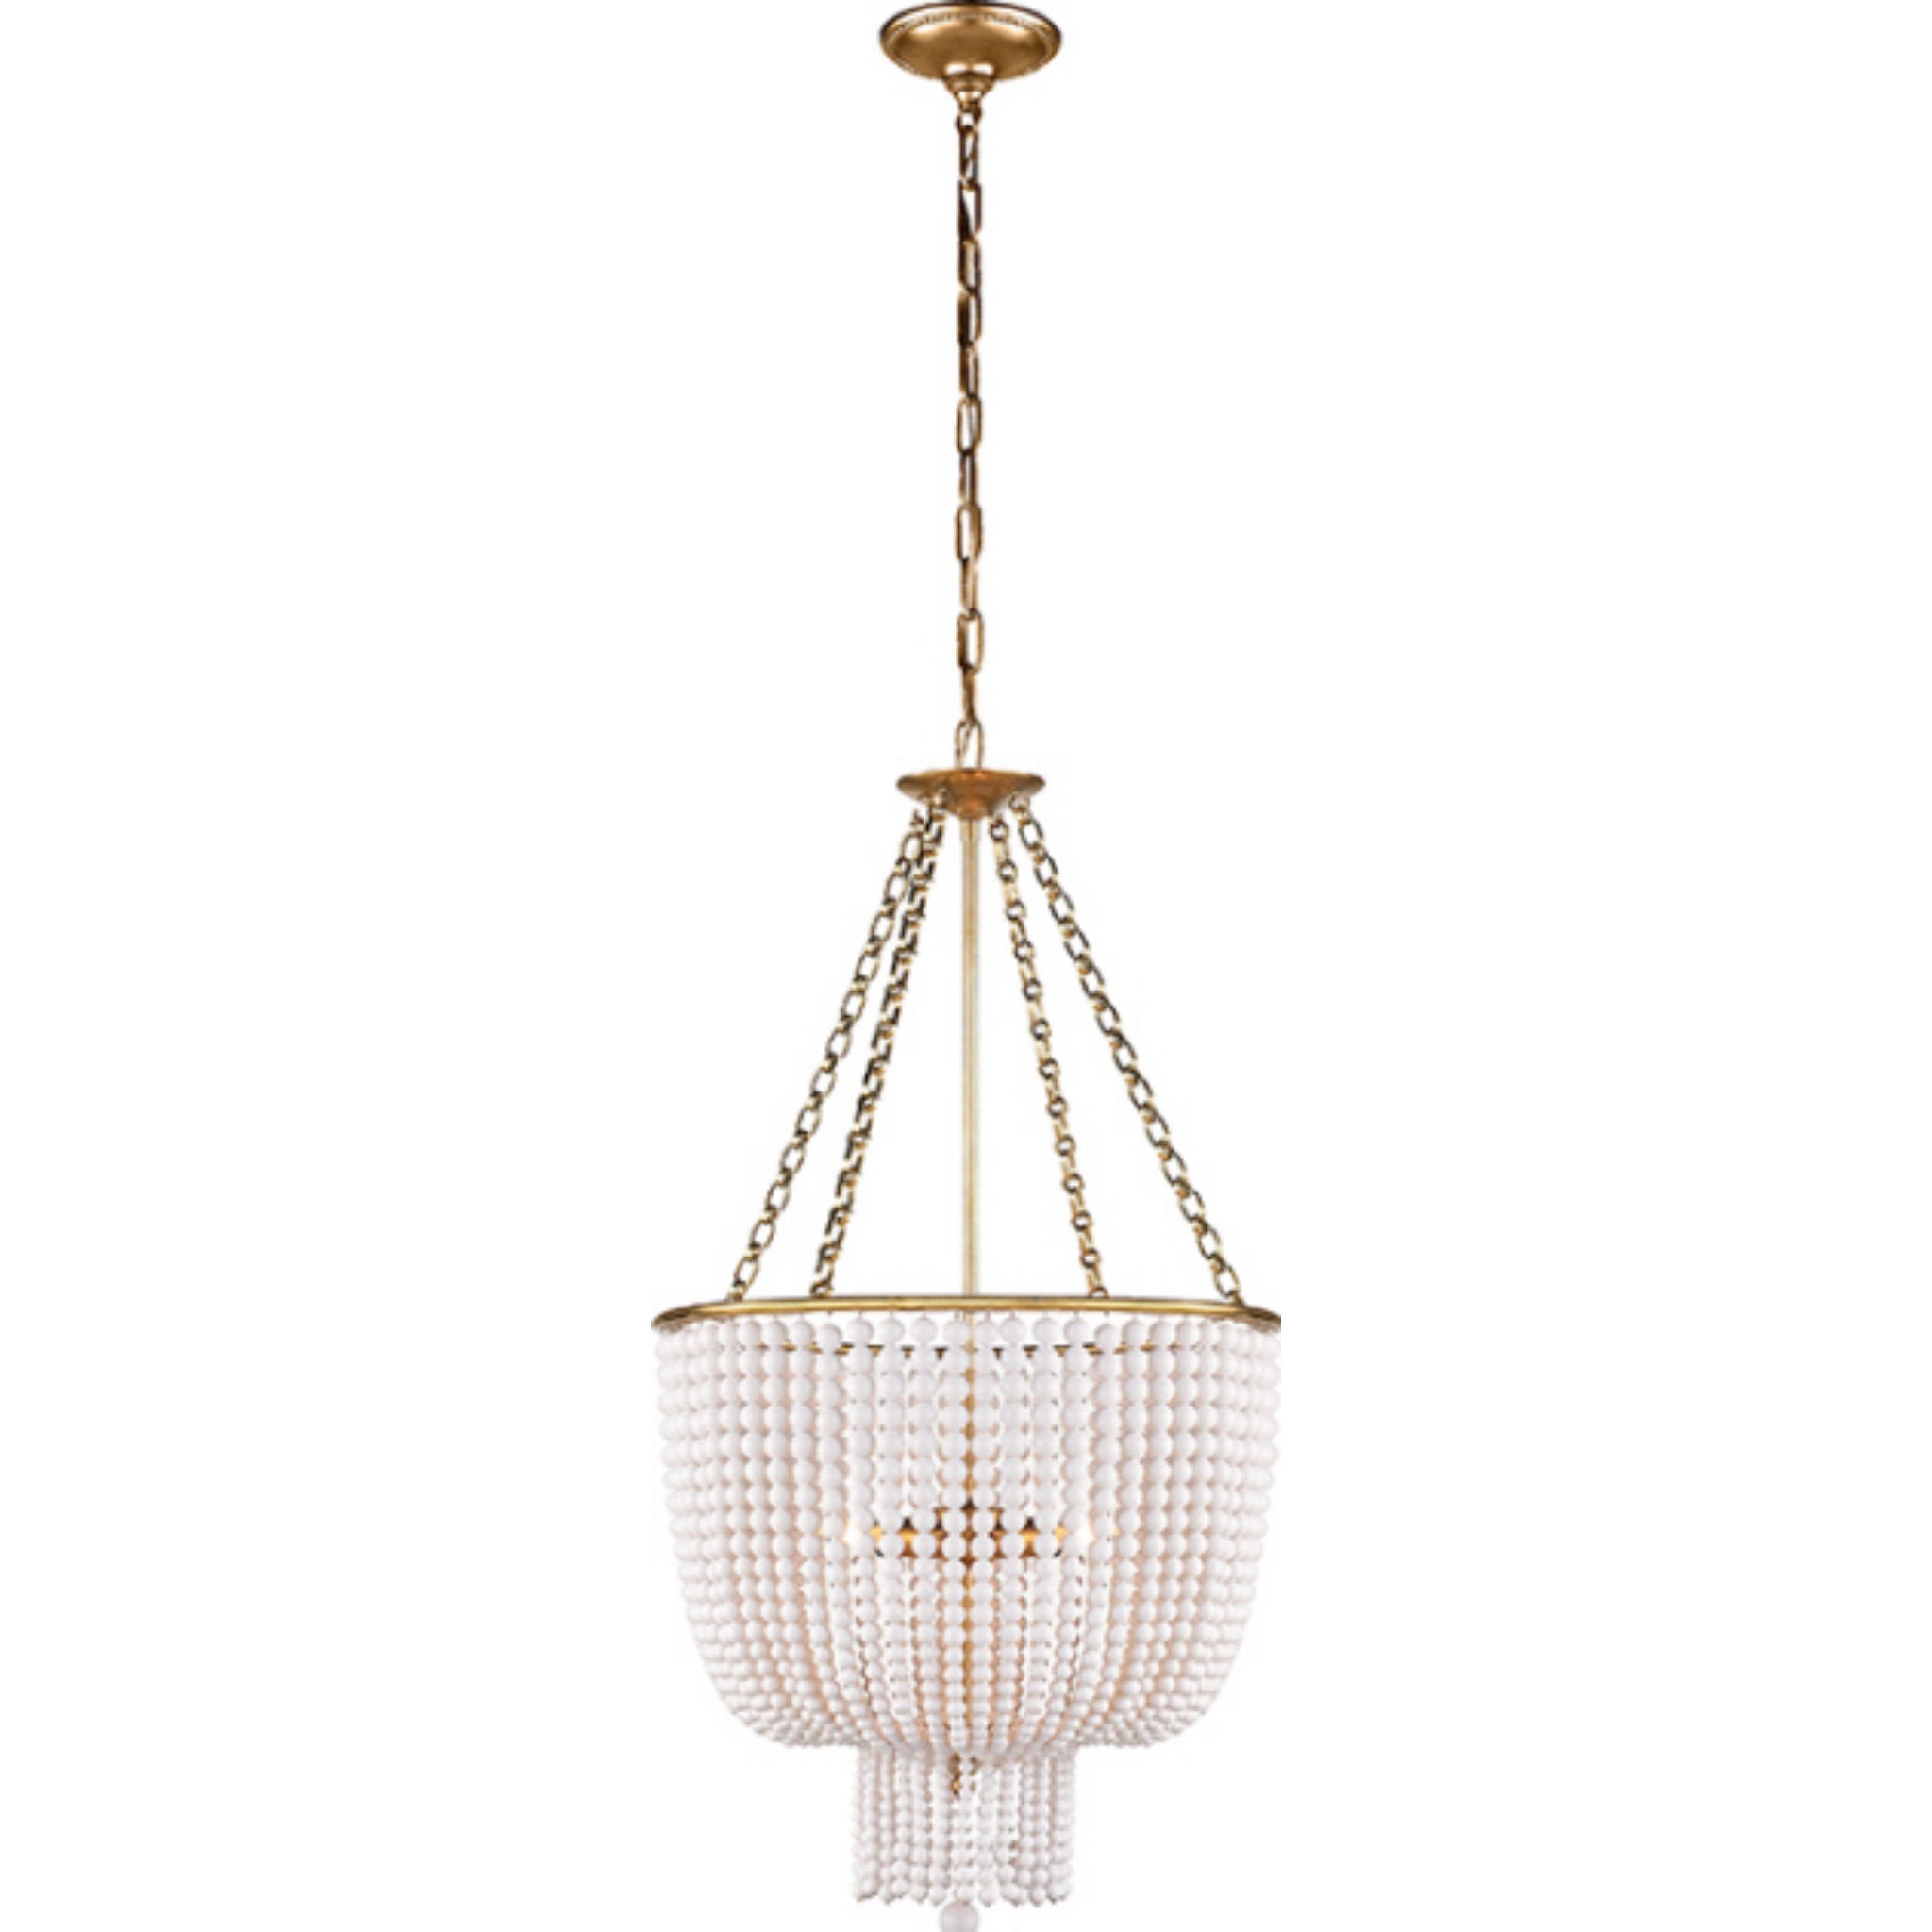 AERIN Jacqueline Chandelier in Hand-Rubbed Antique Brass with White Acrylic